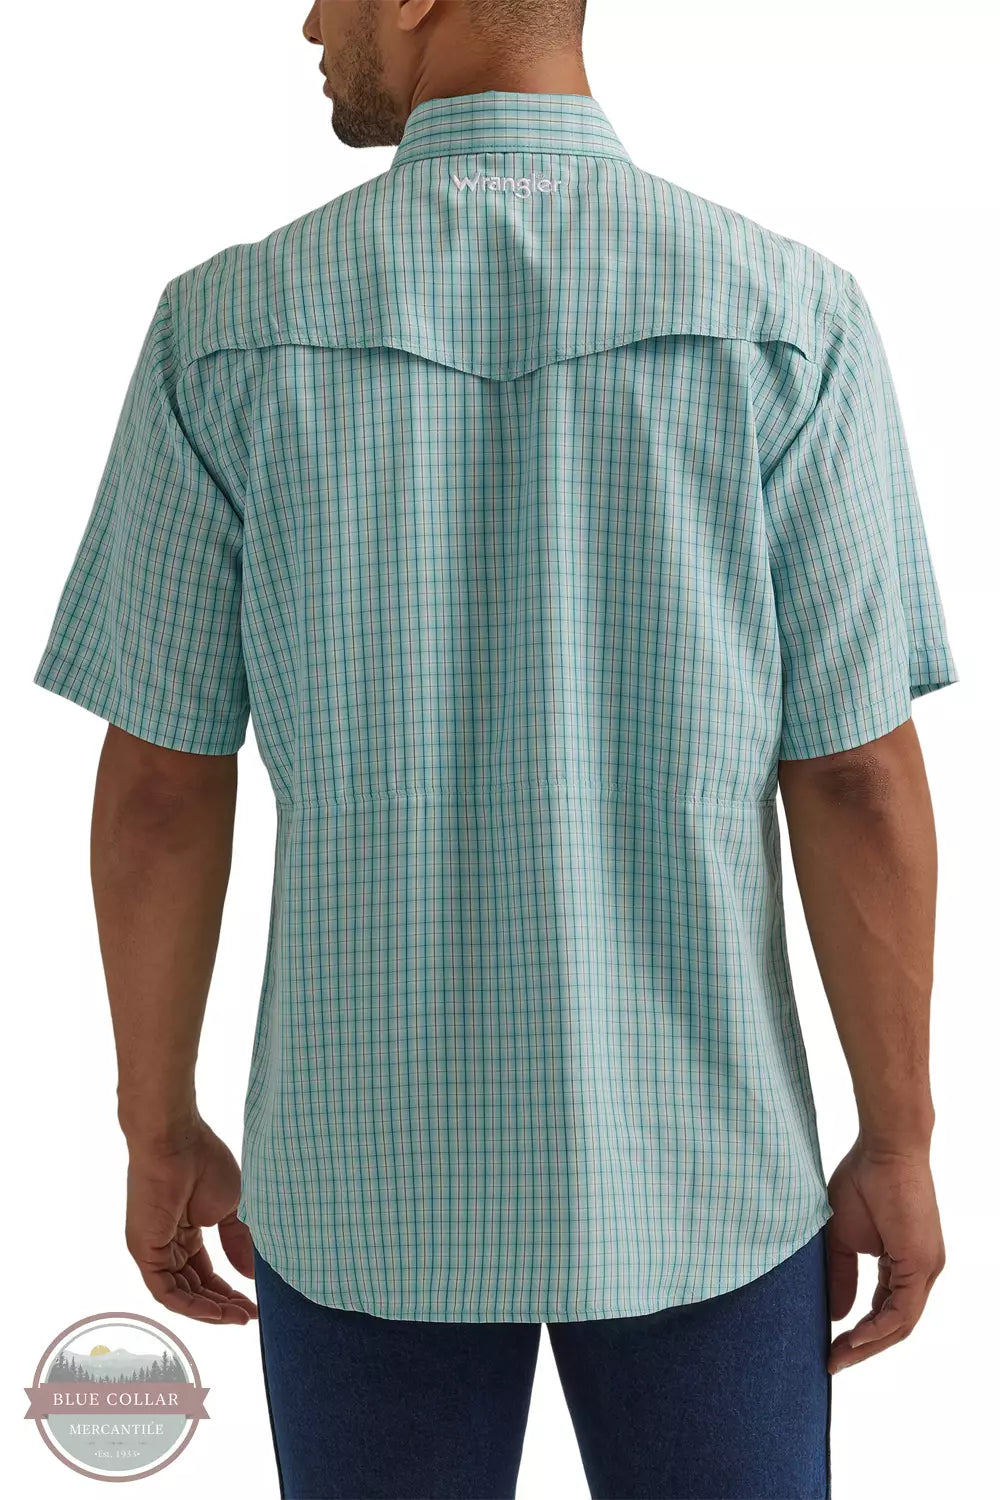 Wrangler 112344595 Performance Snap Shirt in Sky Blue Plaid Back View